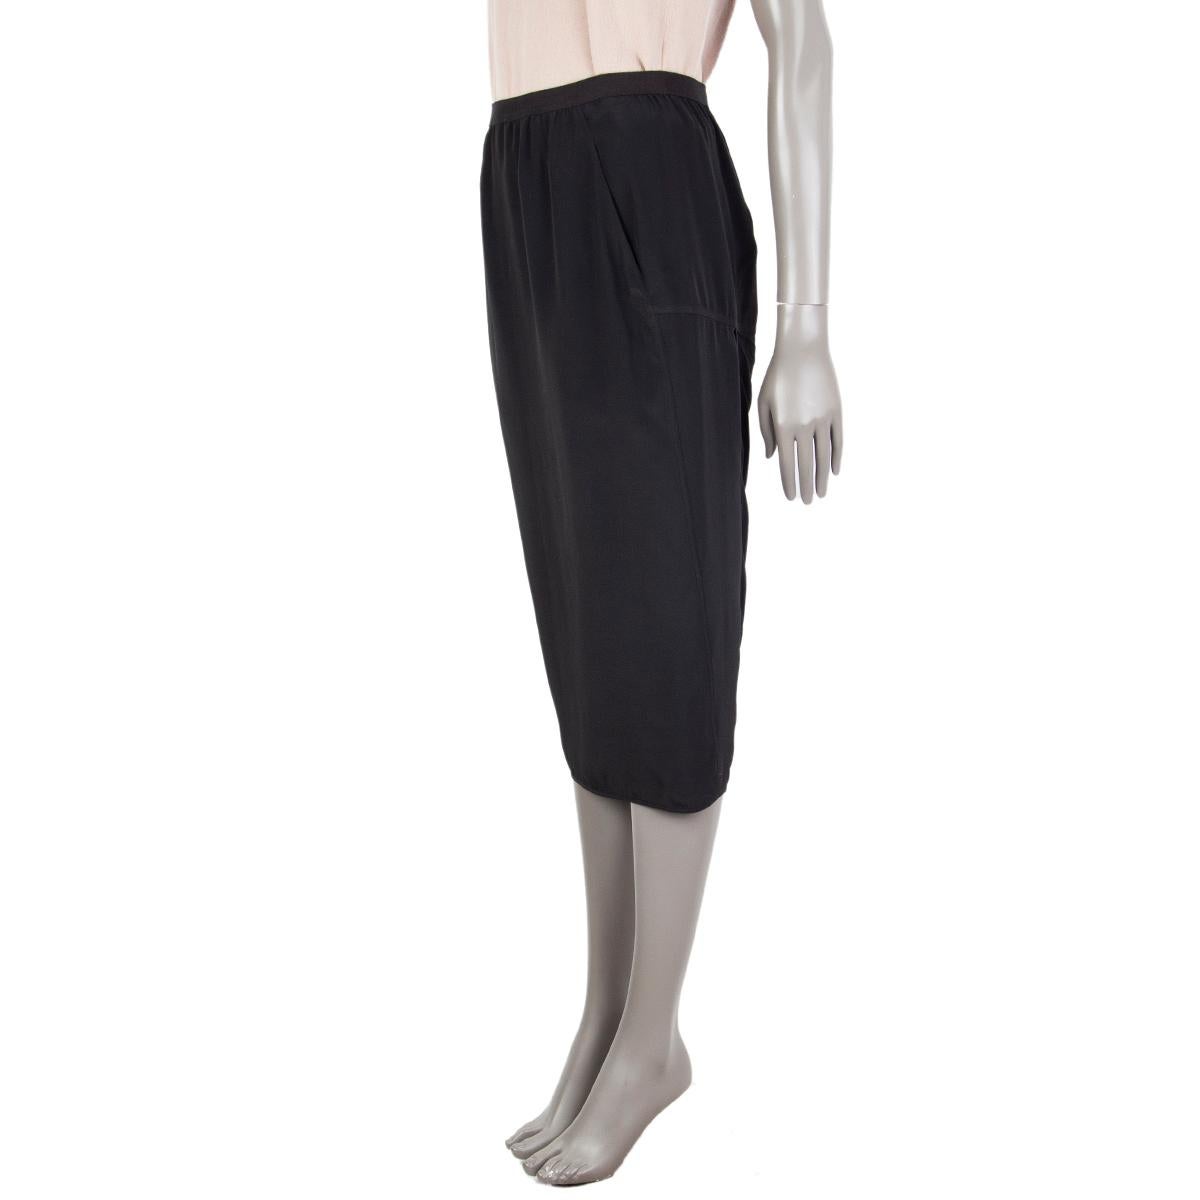 100% authentic Rick Owens 'Walrus' pencil skirt in black viscose 84% and acetate (16%) - please note content tag has been removed. With wrap slir on the back, and two slit pockets on the sides. Unlined. Has been worn and is in excellent